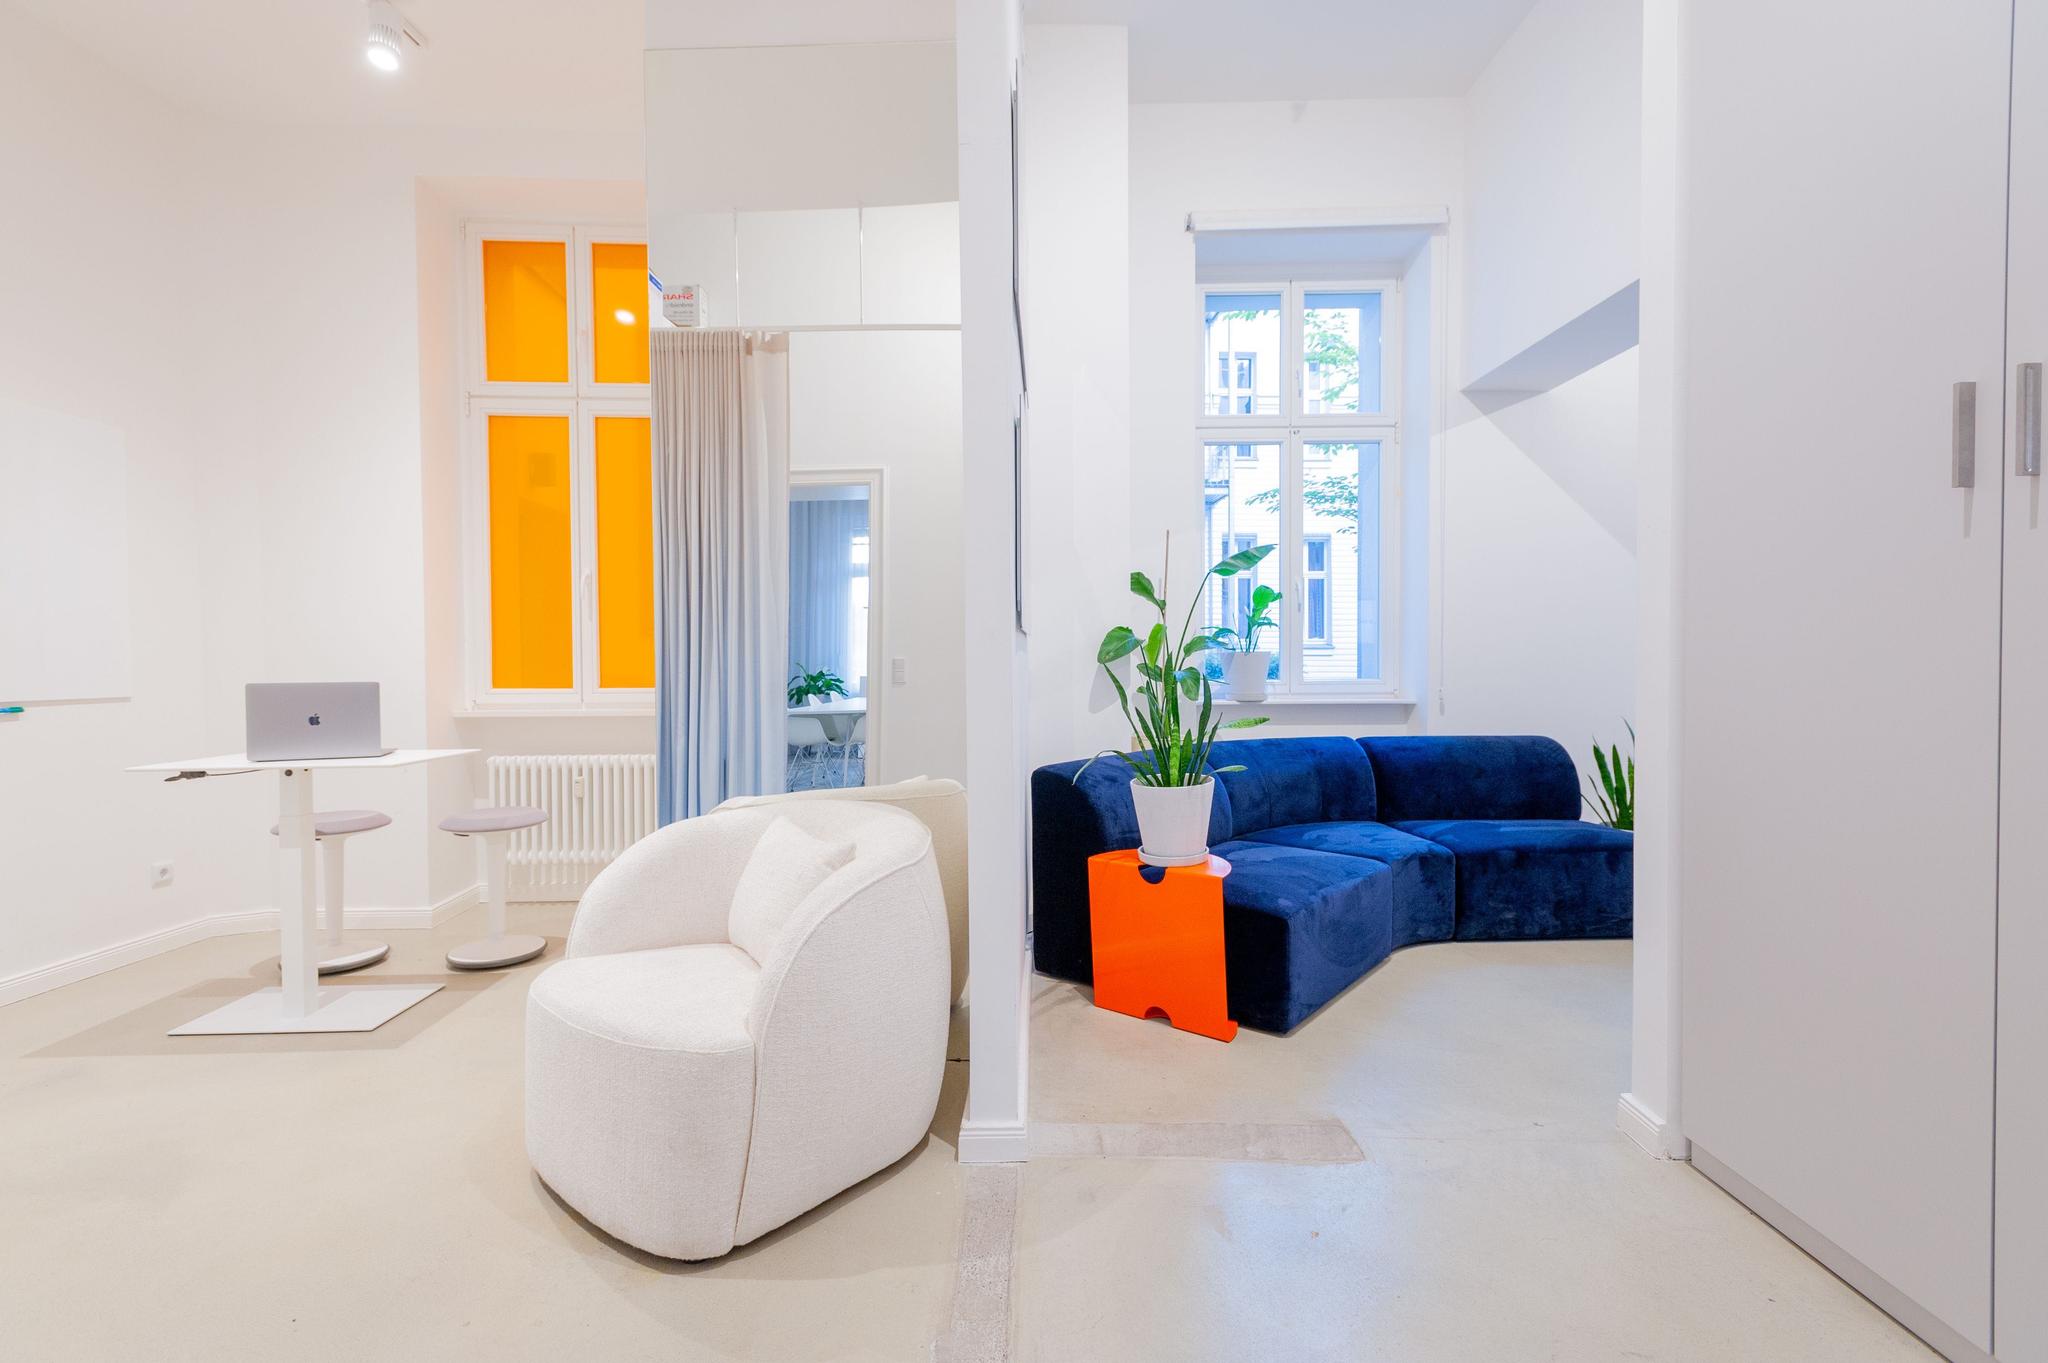 White, open office space with accents of orange and blue. To the left we see a standing desk with a macbook on it. On the right next to a wall-divider, there is a deep blue curved couch with a potted plant next to it.